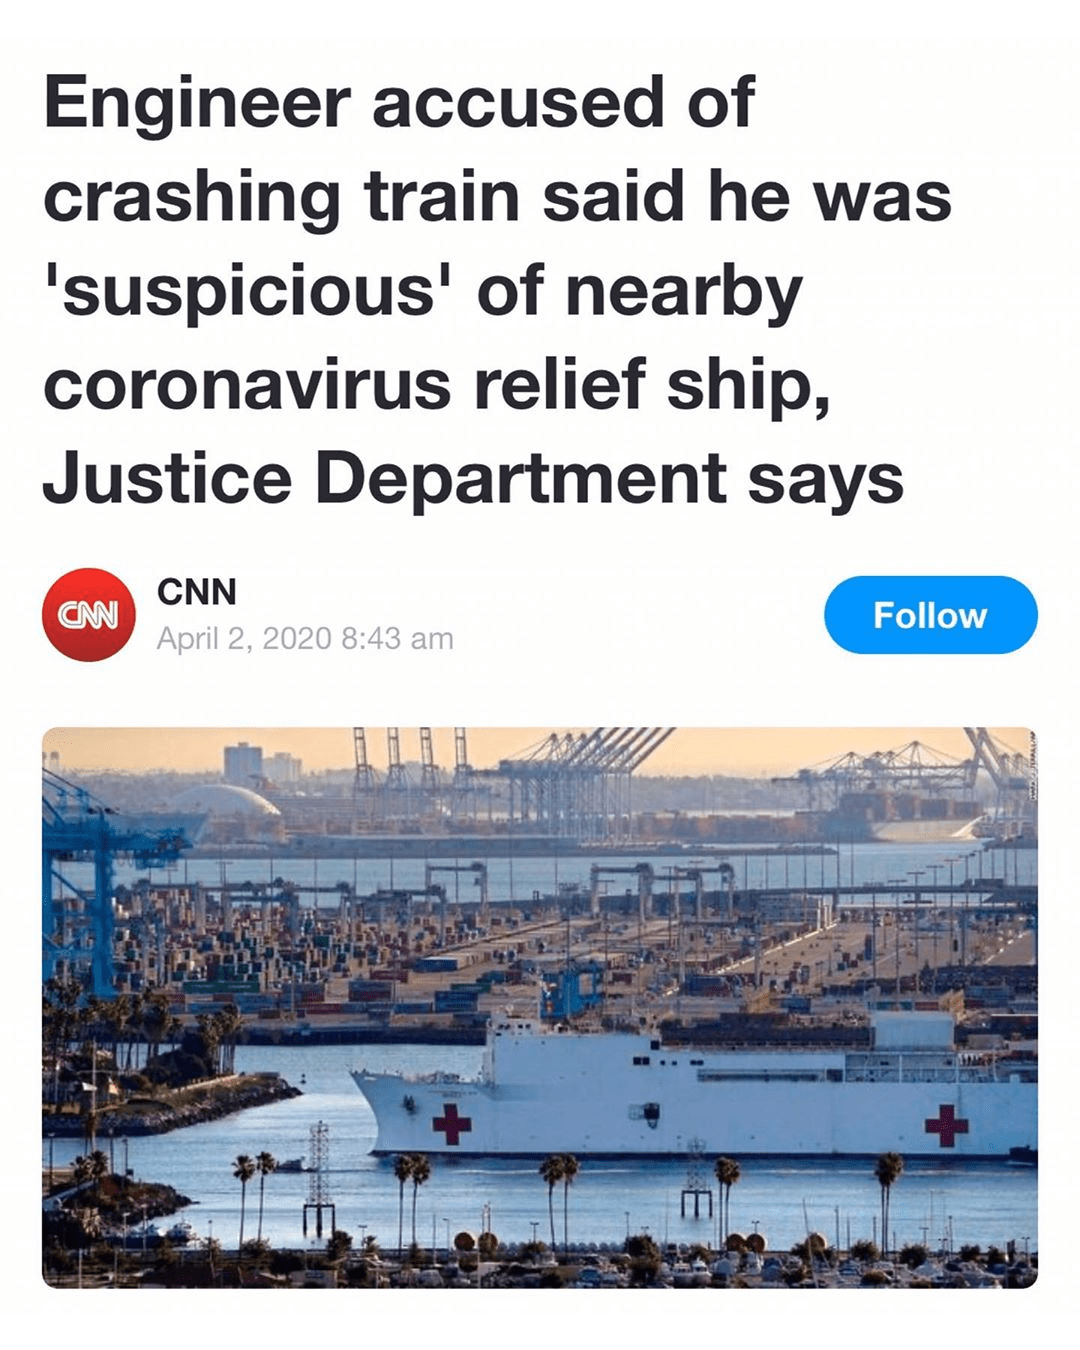 You are currently viewing Engineer accused of crashing train said he was "suspicious" of nearby coronavirus relief ship, Justice Department says